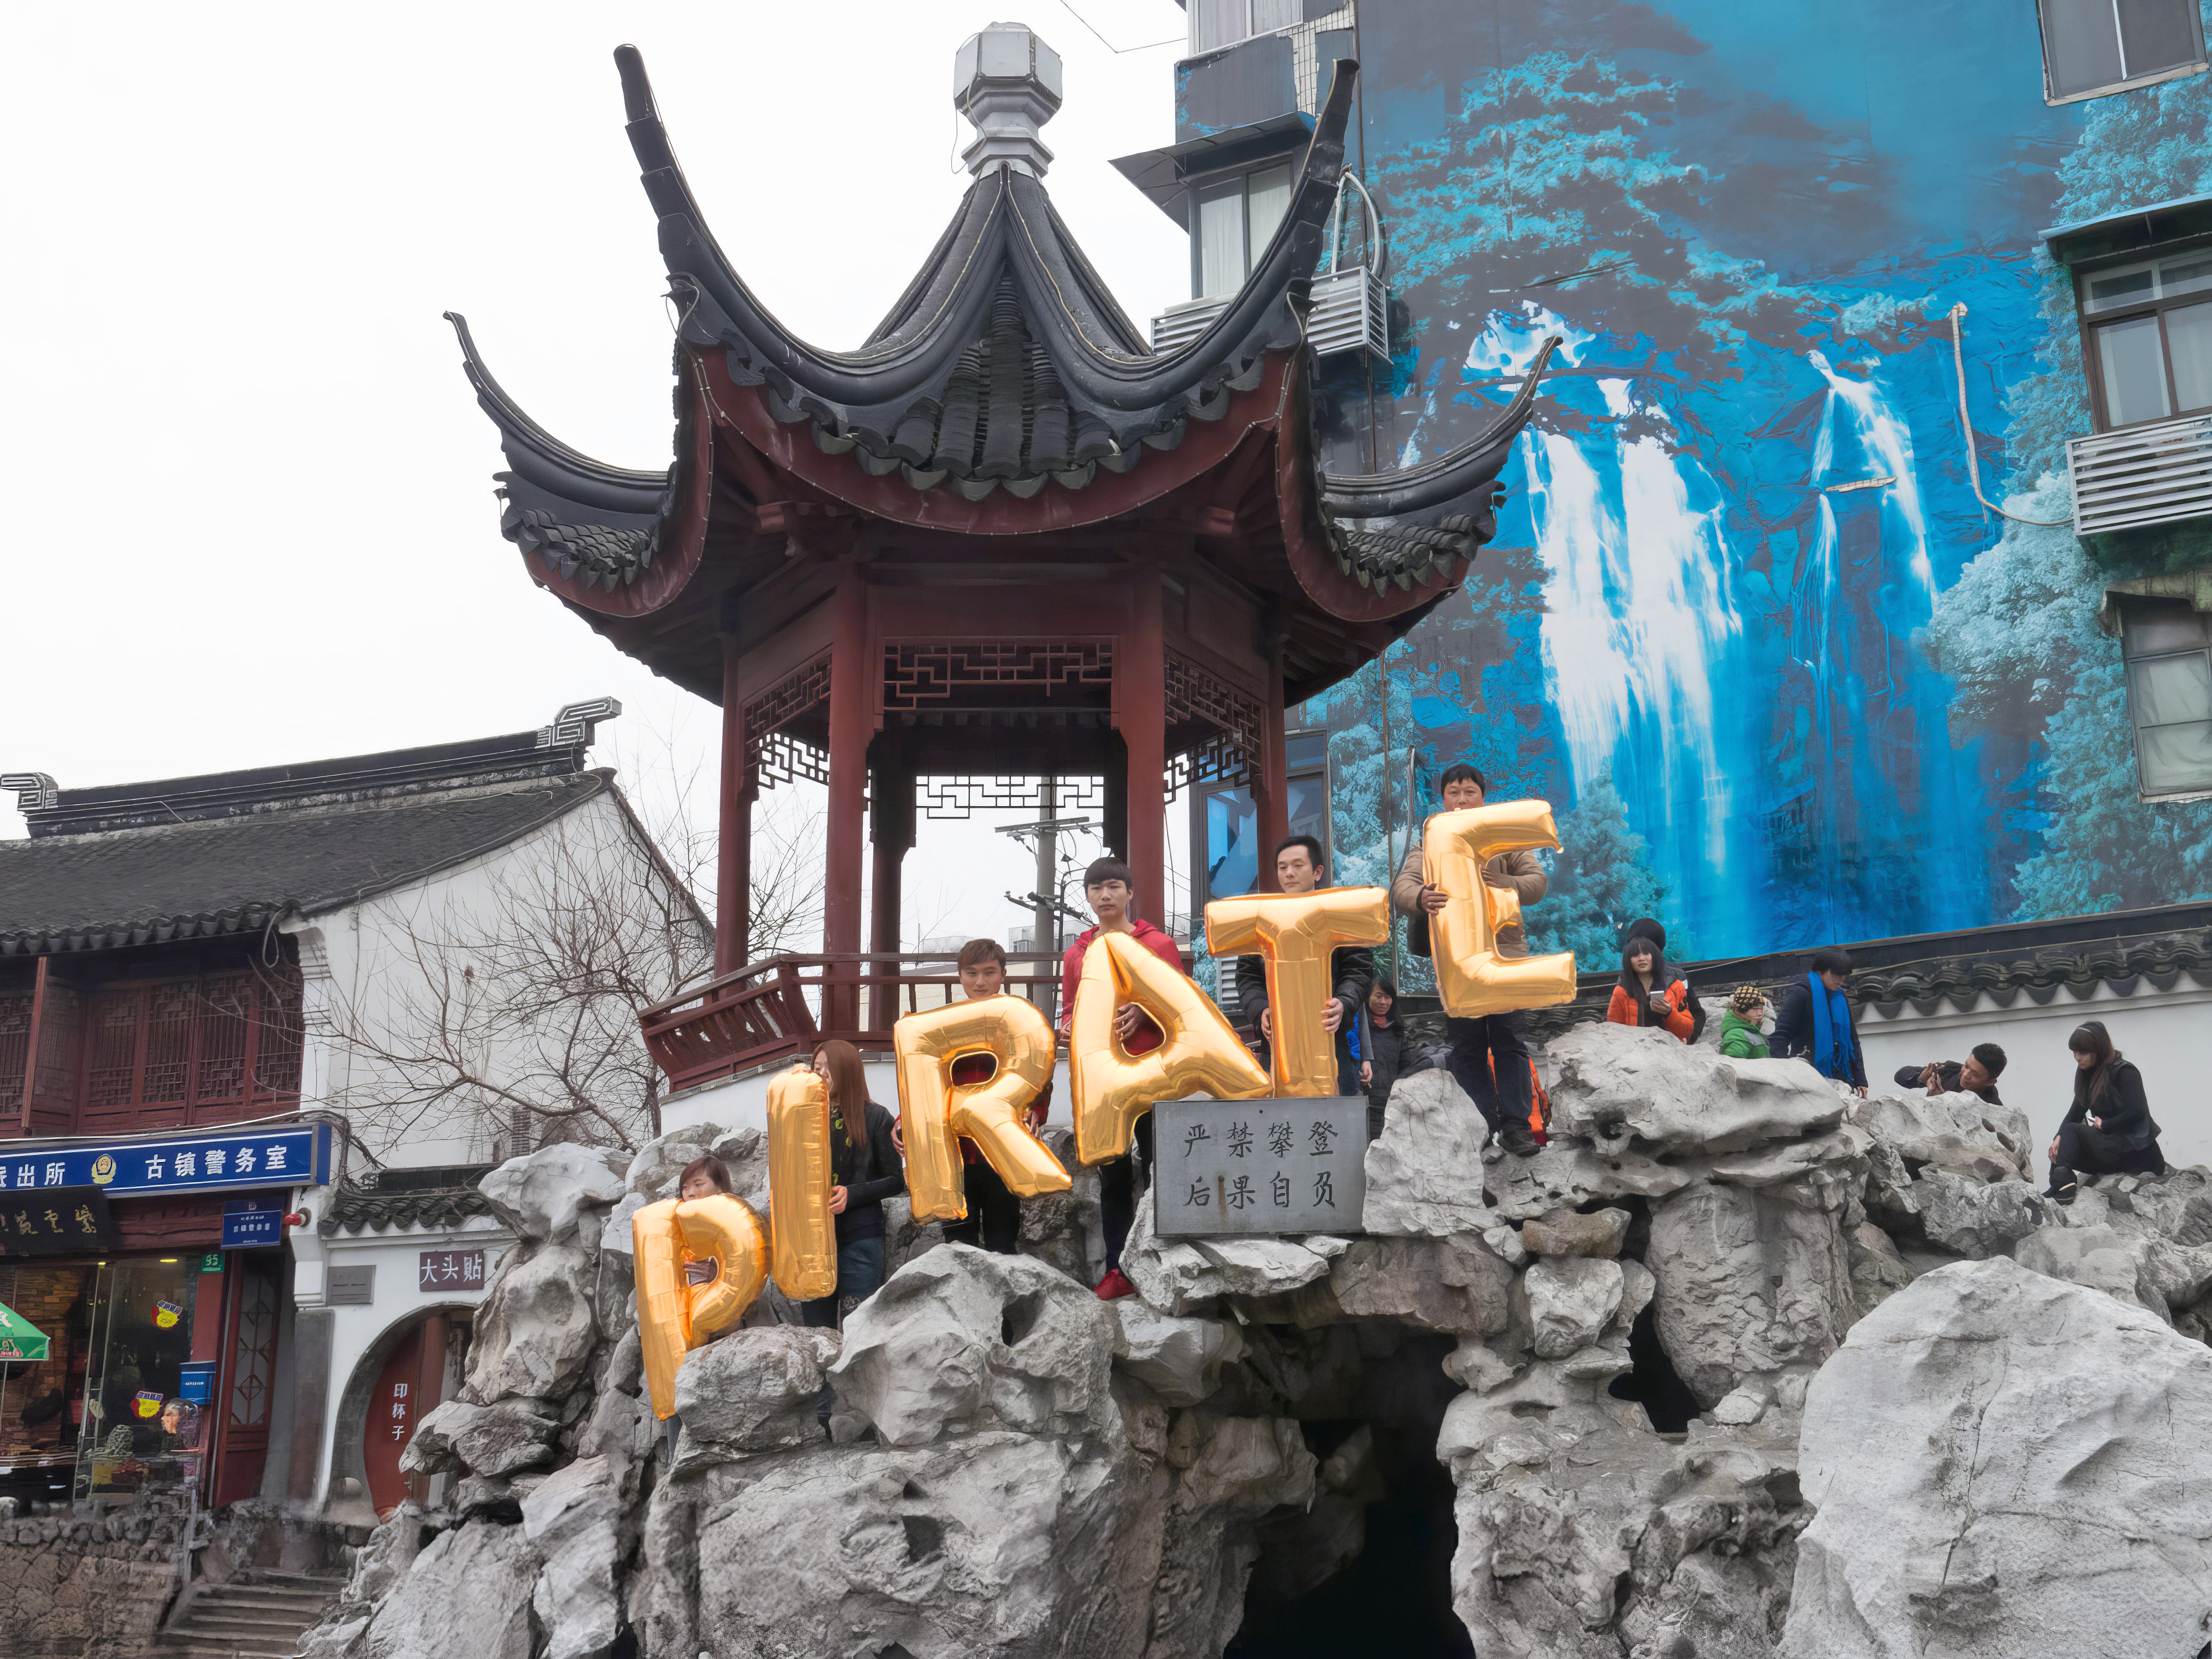 China, Shanghai, Qibao Ancient Town (七宝古镇) - Pirate, Silence Was Golden, gold balloons